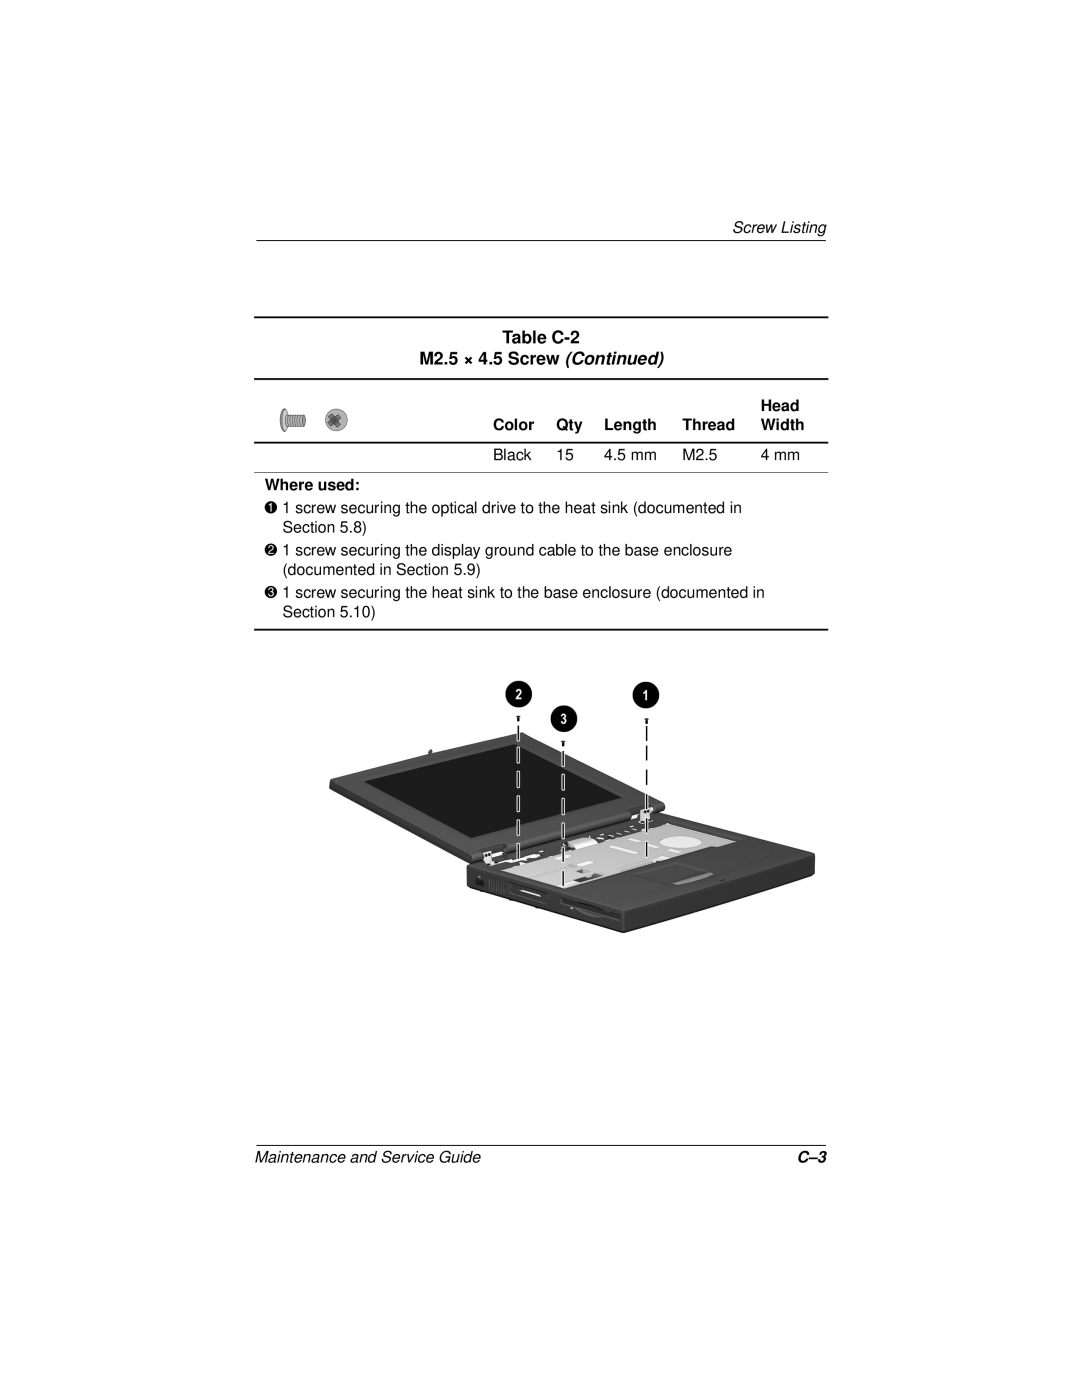 Compaq N110 manual Table C-2 M2.5 × 4.5 Screw Continued, Screw Listing, Maintenance and Service Guide 